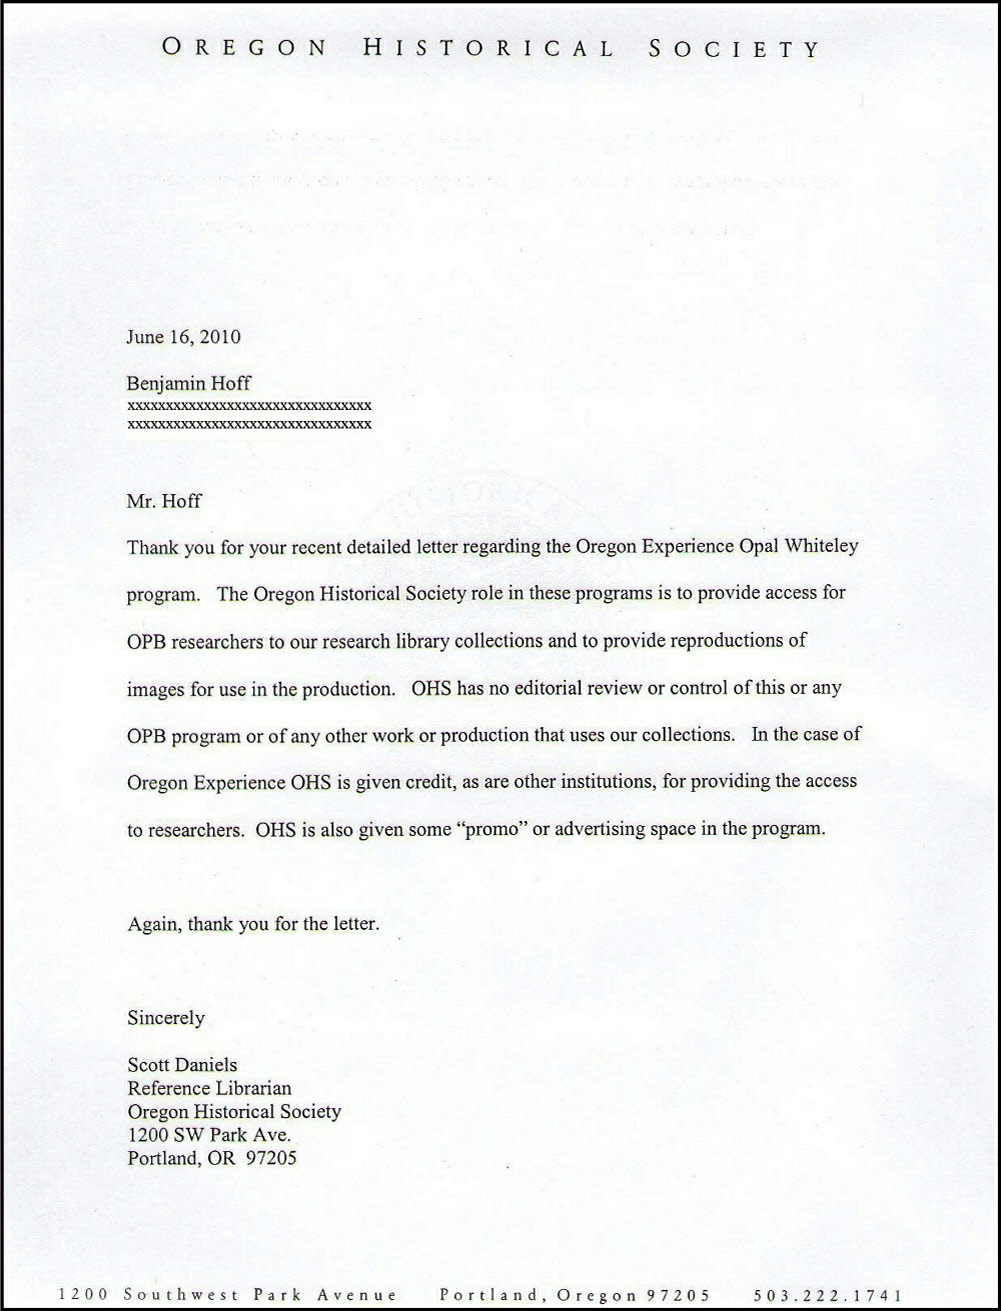 Reply from OHS to Benjamin Hoff June 2010